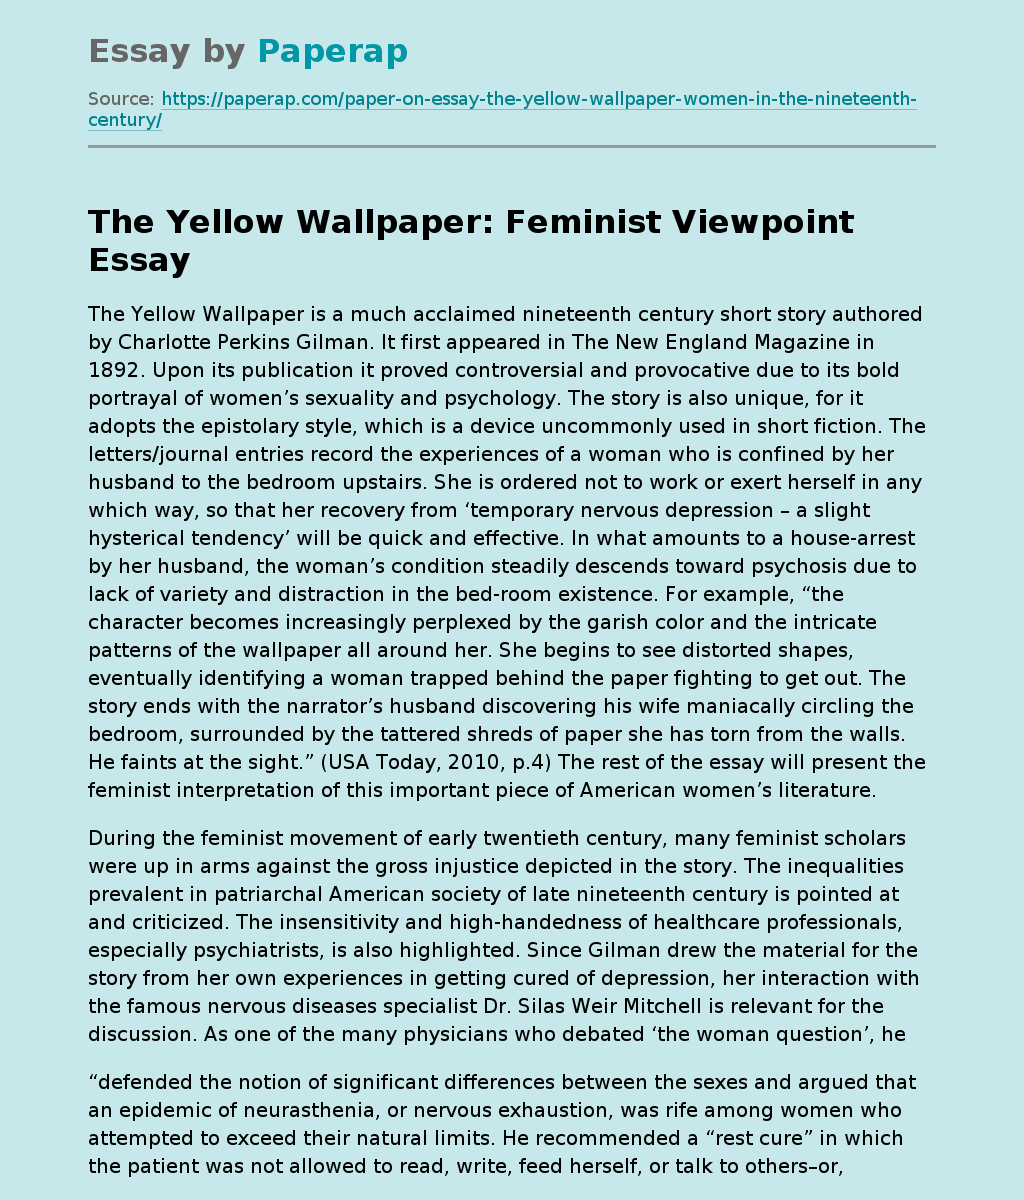 The Yellow Wallpaper: Feminist Viewpoint